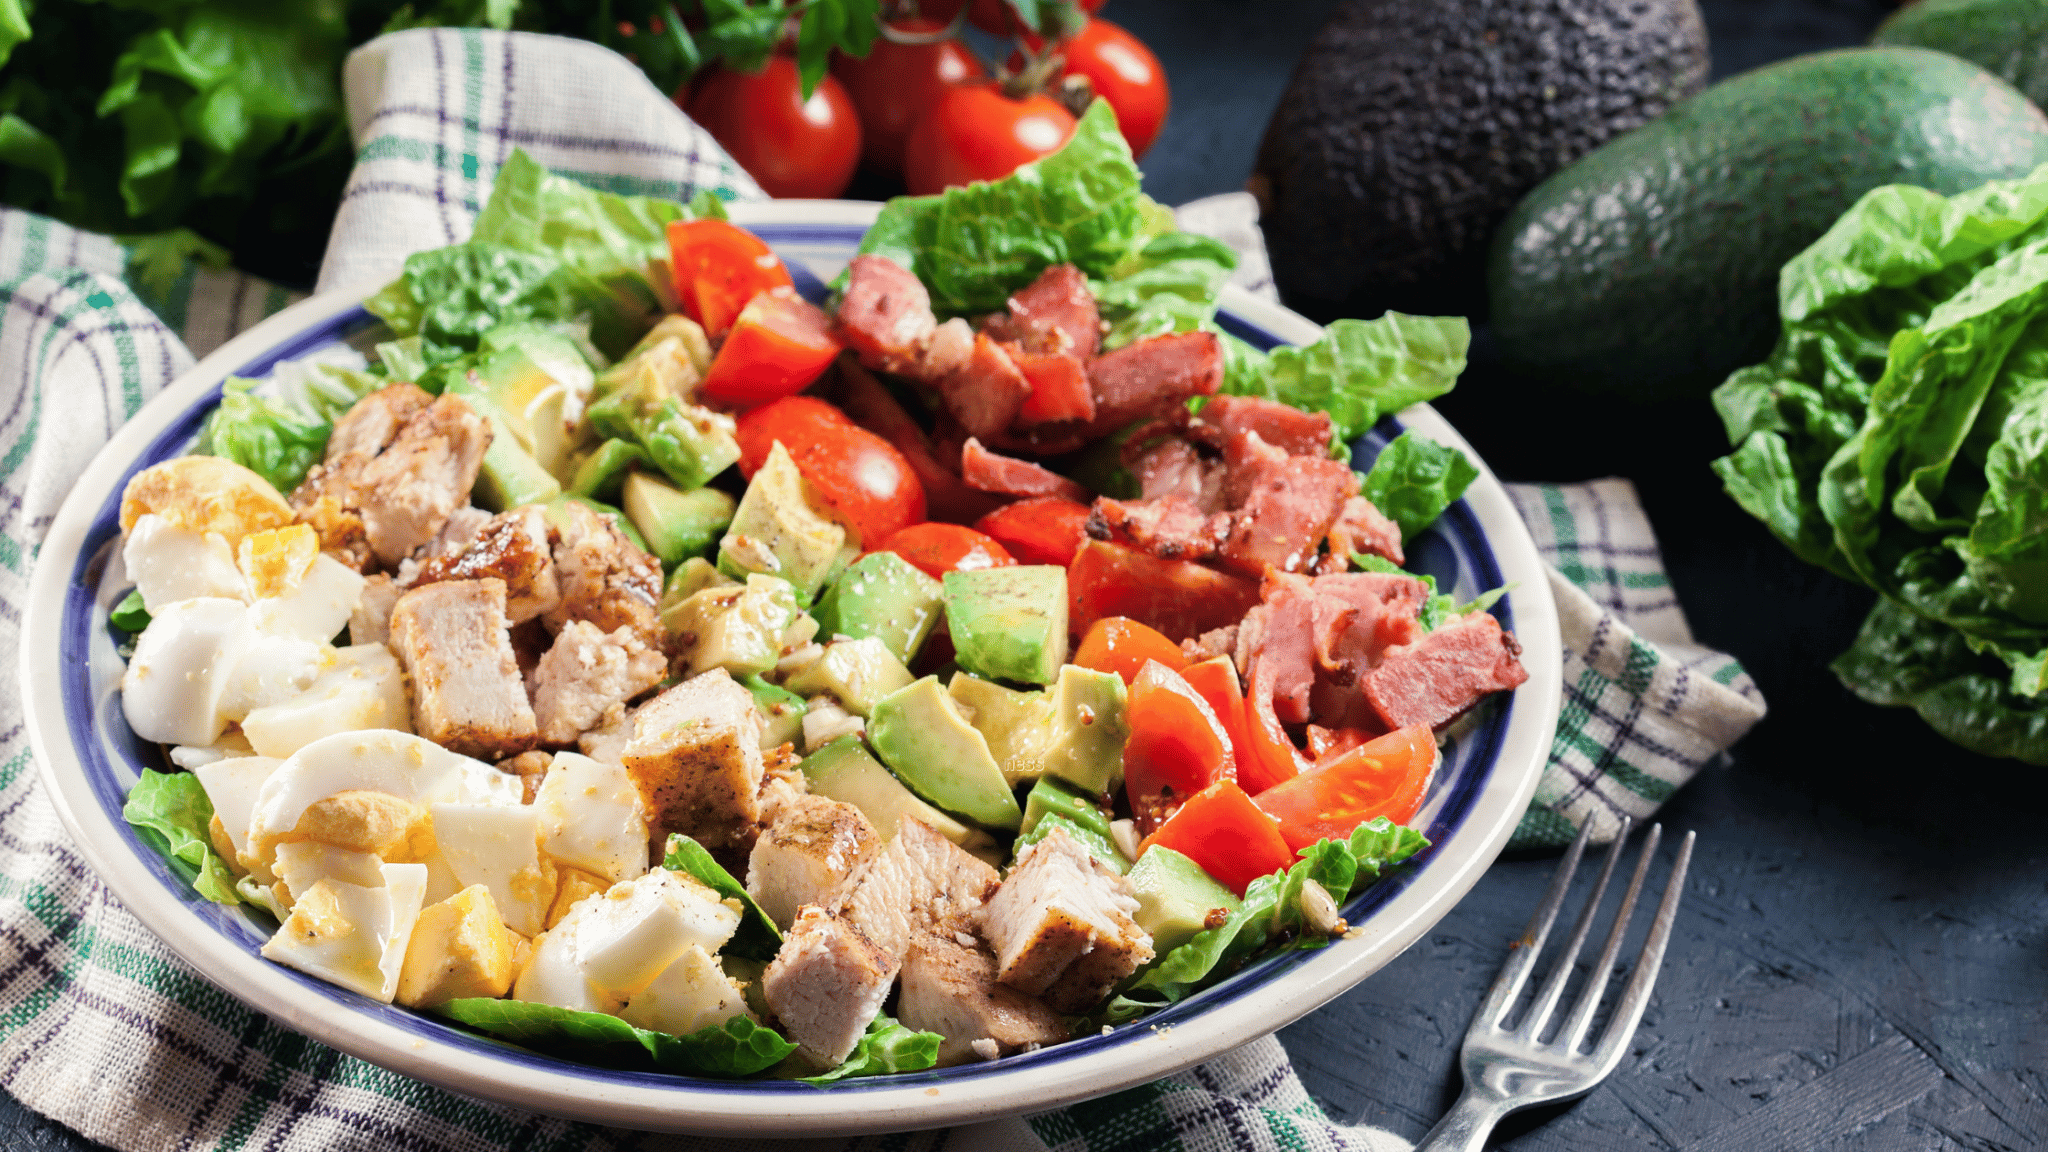 cobb salad on a table with veggies